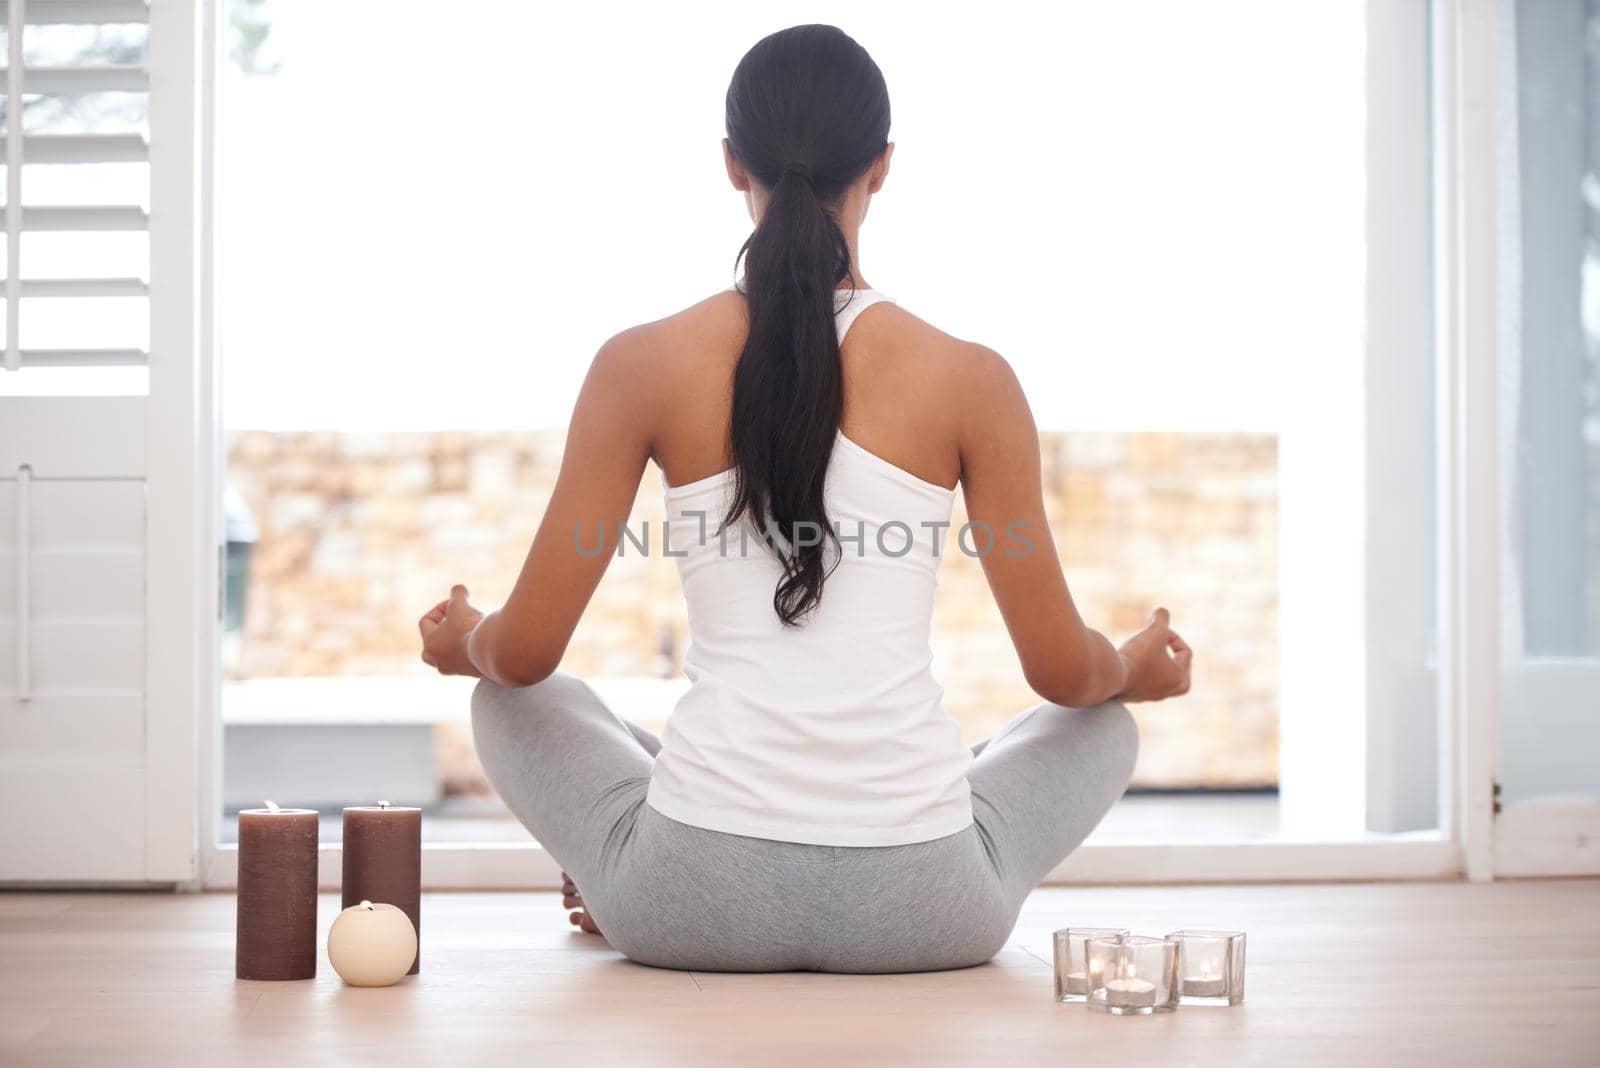 Rearview image of a woman meditating at home.